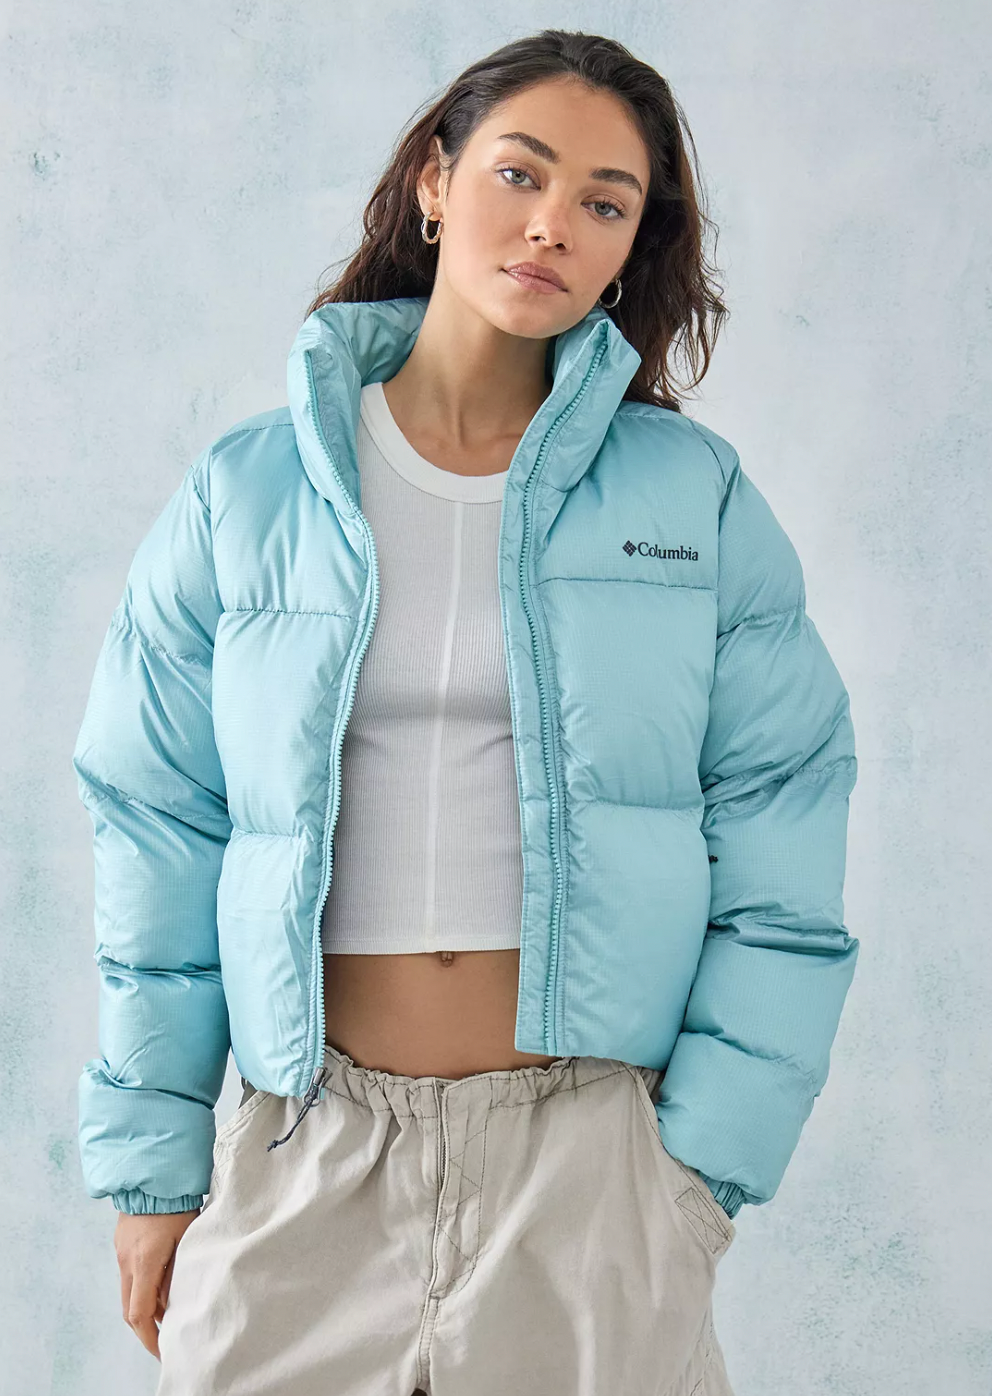 Columbia + Blue Cropped Puffect Puffer Jacket